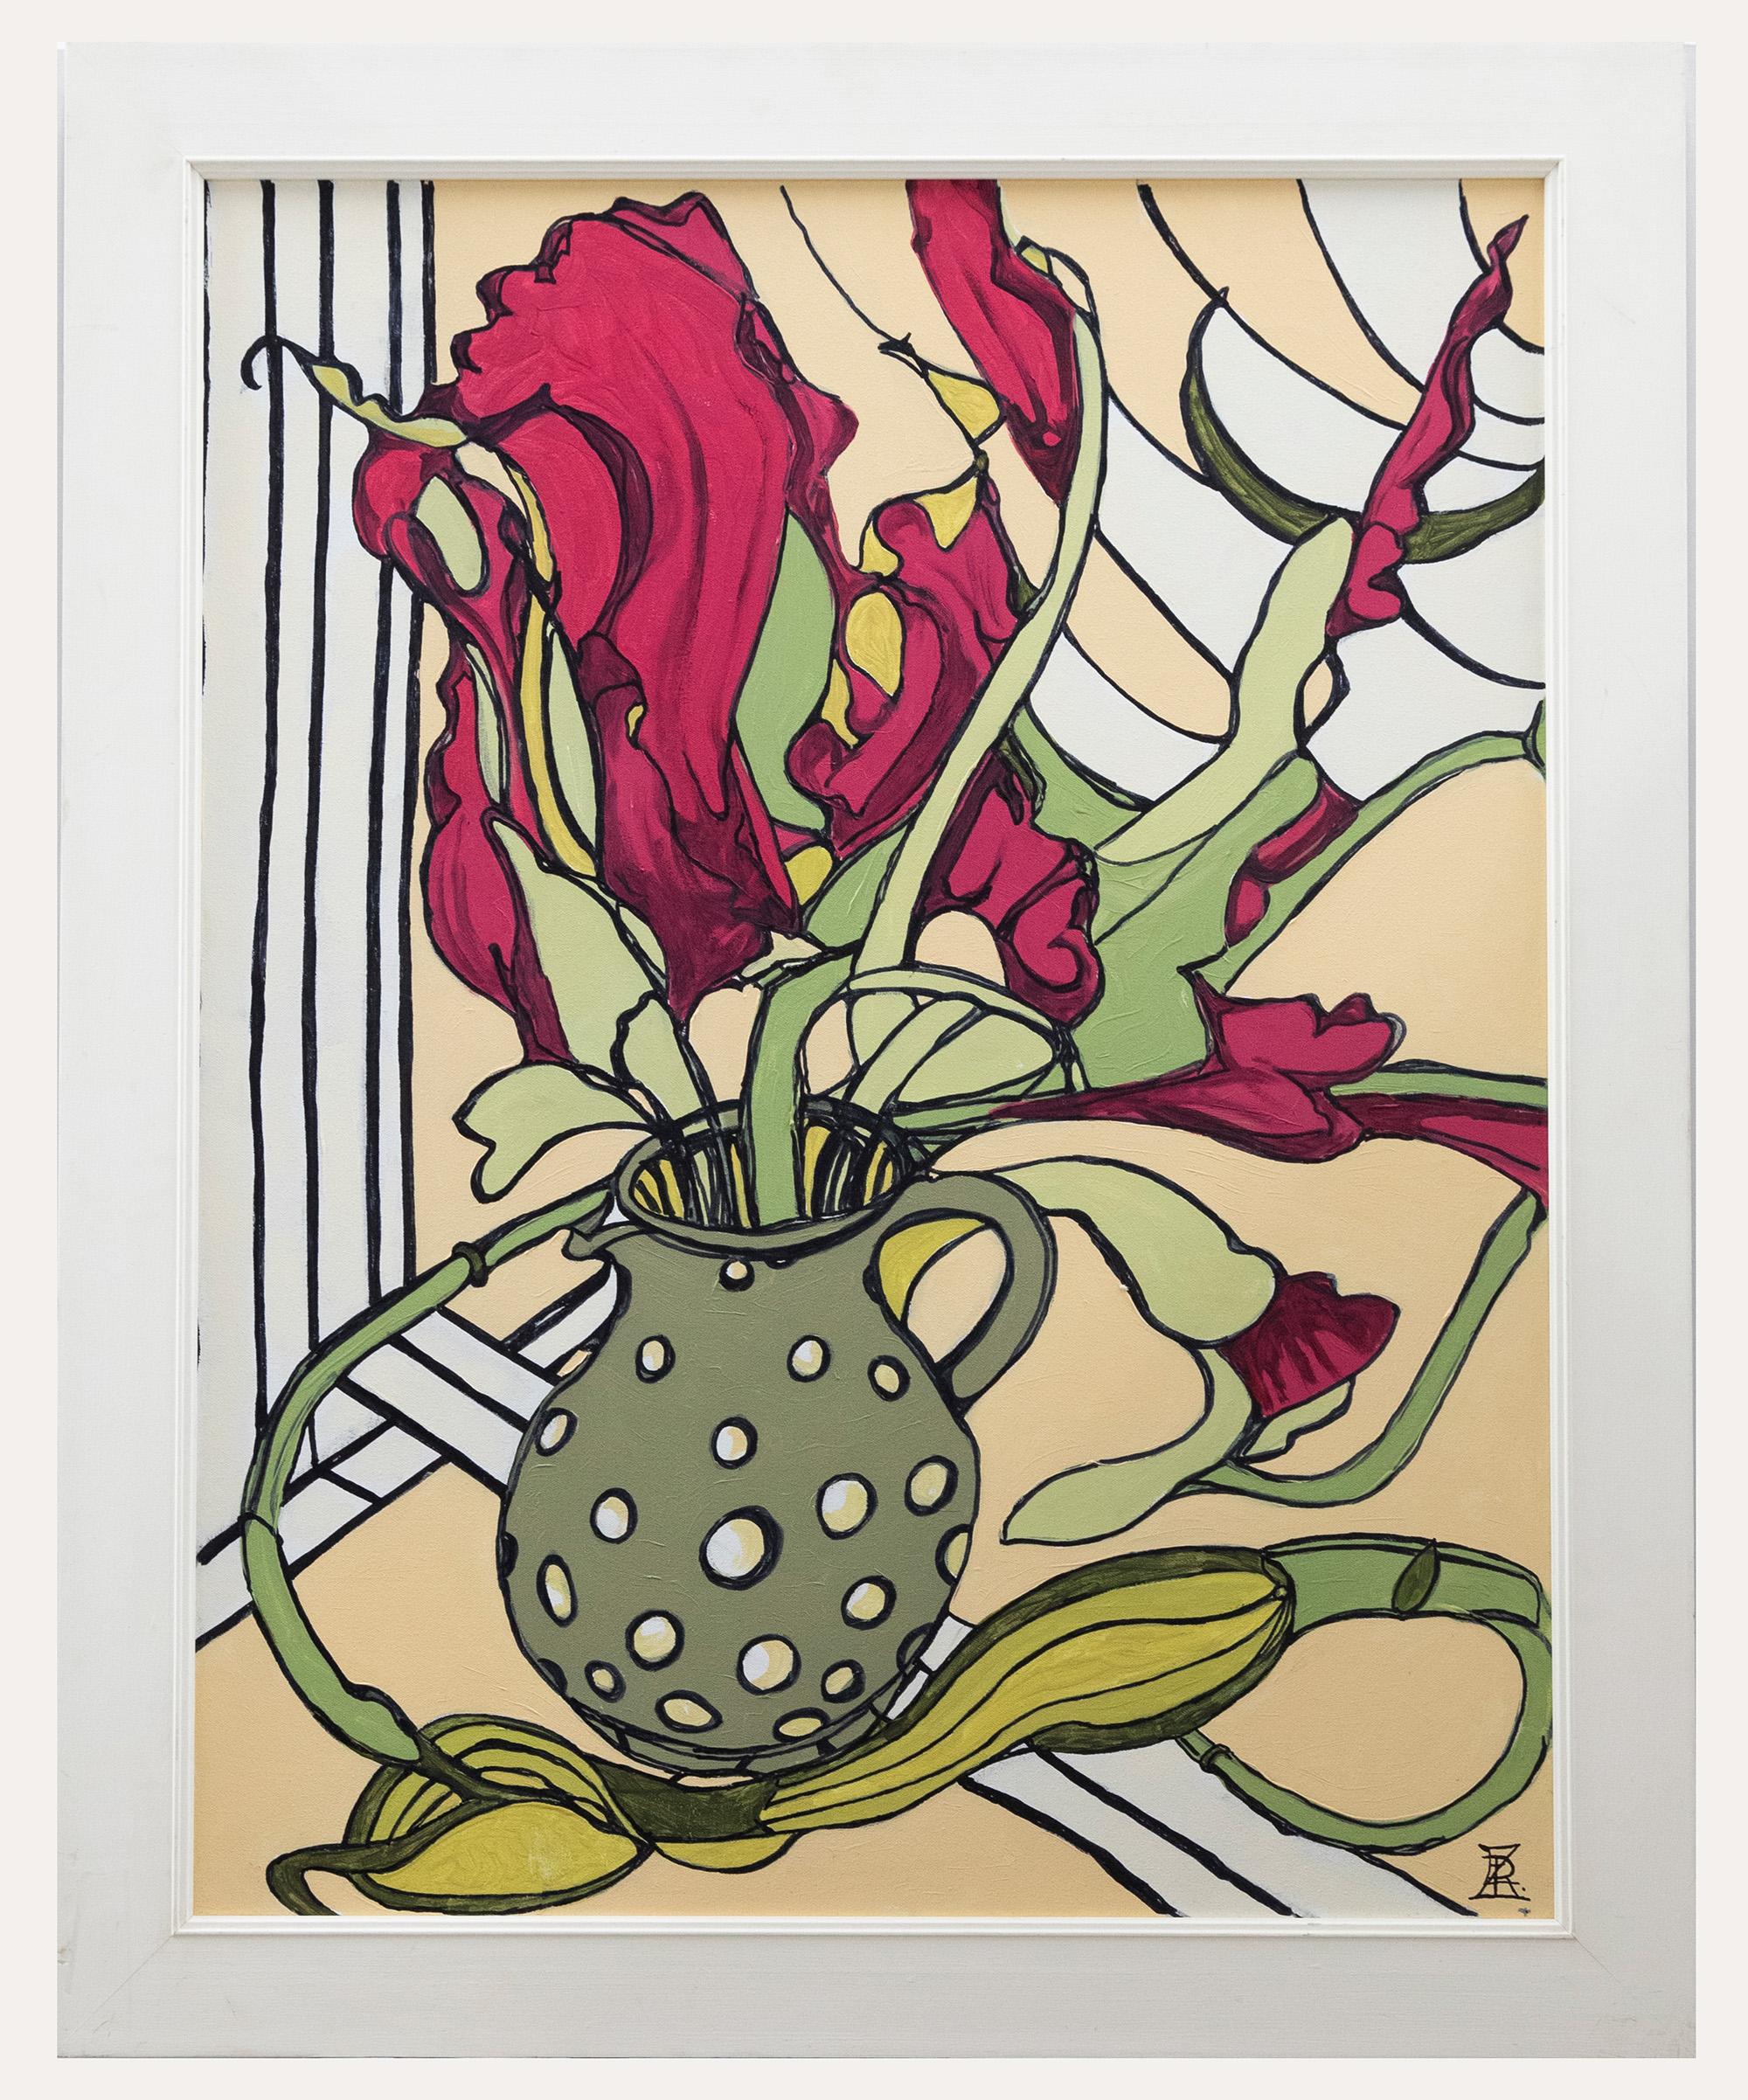 A colourful still life study of a spotted jug holding vibrant flowers. The artist places colour and pattern at the heart of the composition, creating dynamic shapes and forms to bring life to the composition. Signed to the lower right. Title